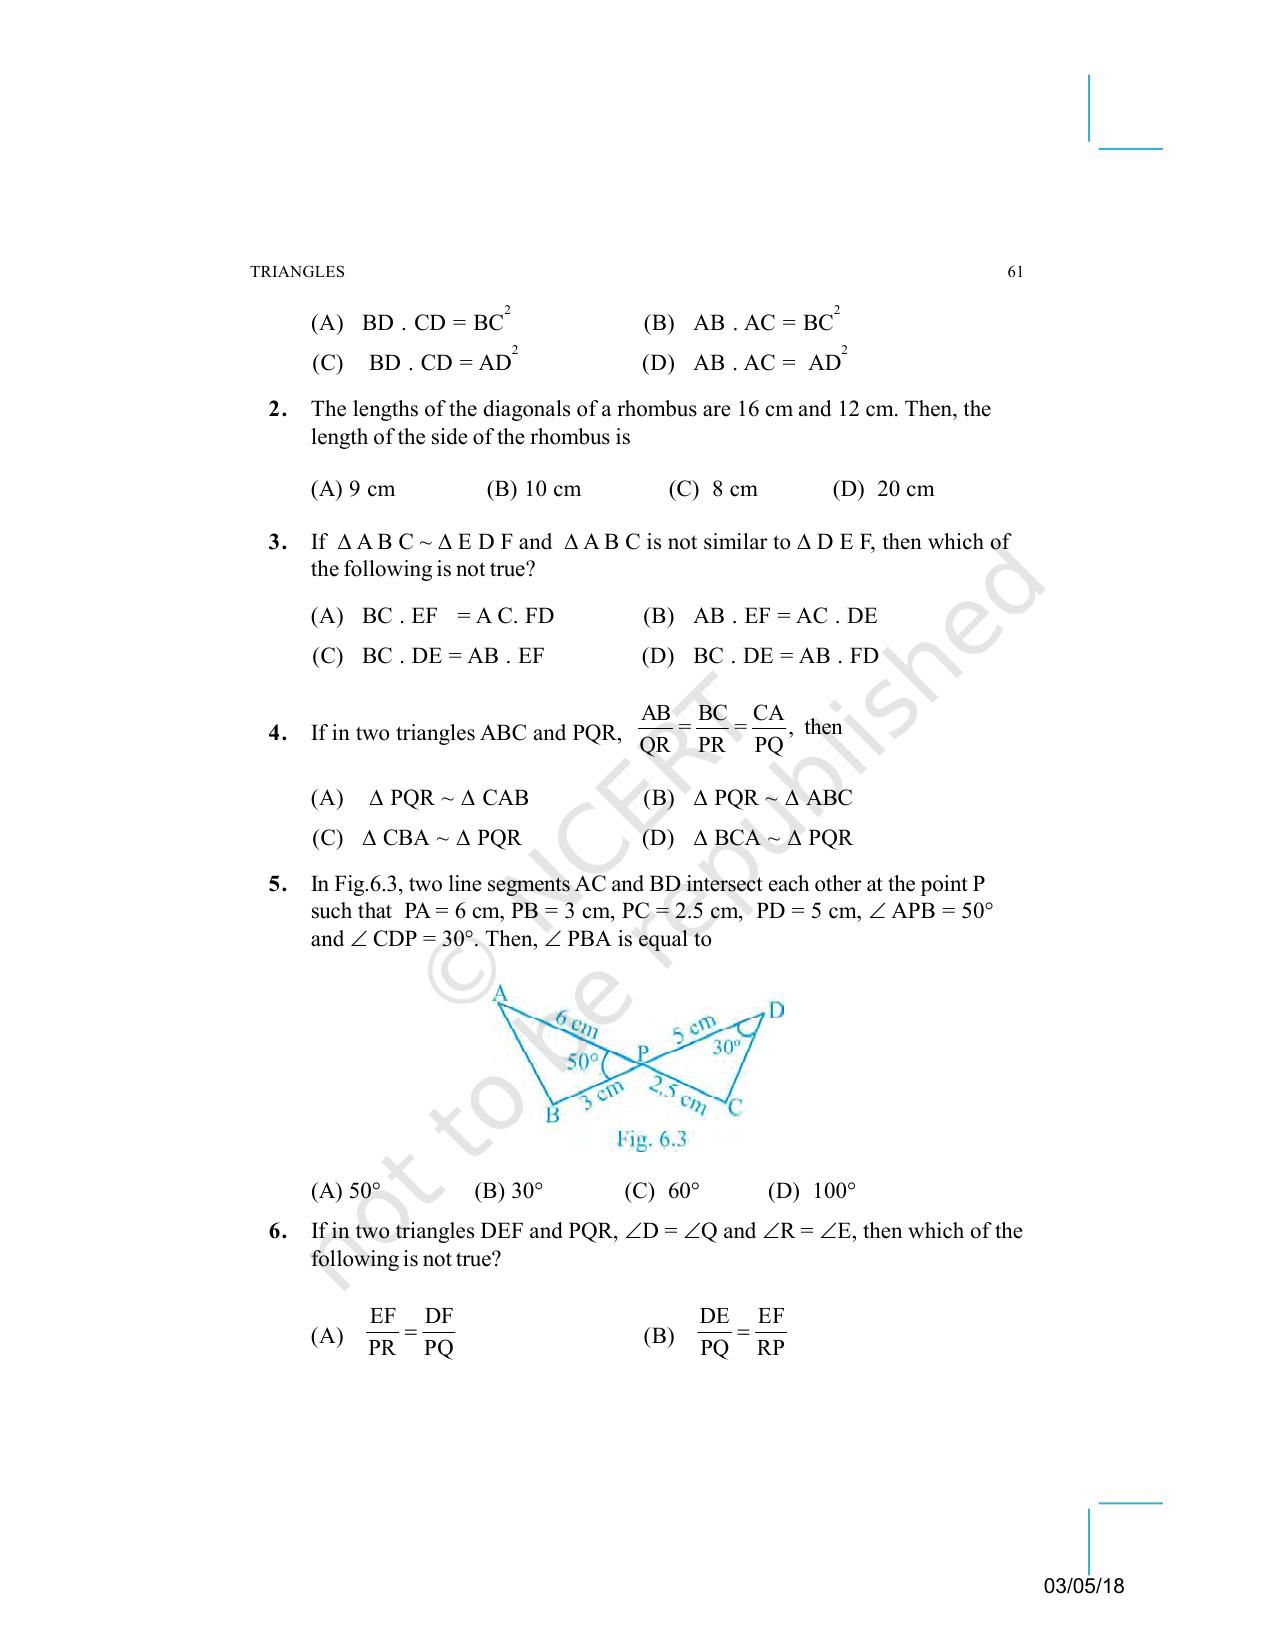 NCERT Exemplar Book for Class 10 Maths: Chapter 6 Triangles - Page 3